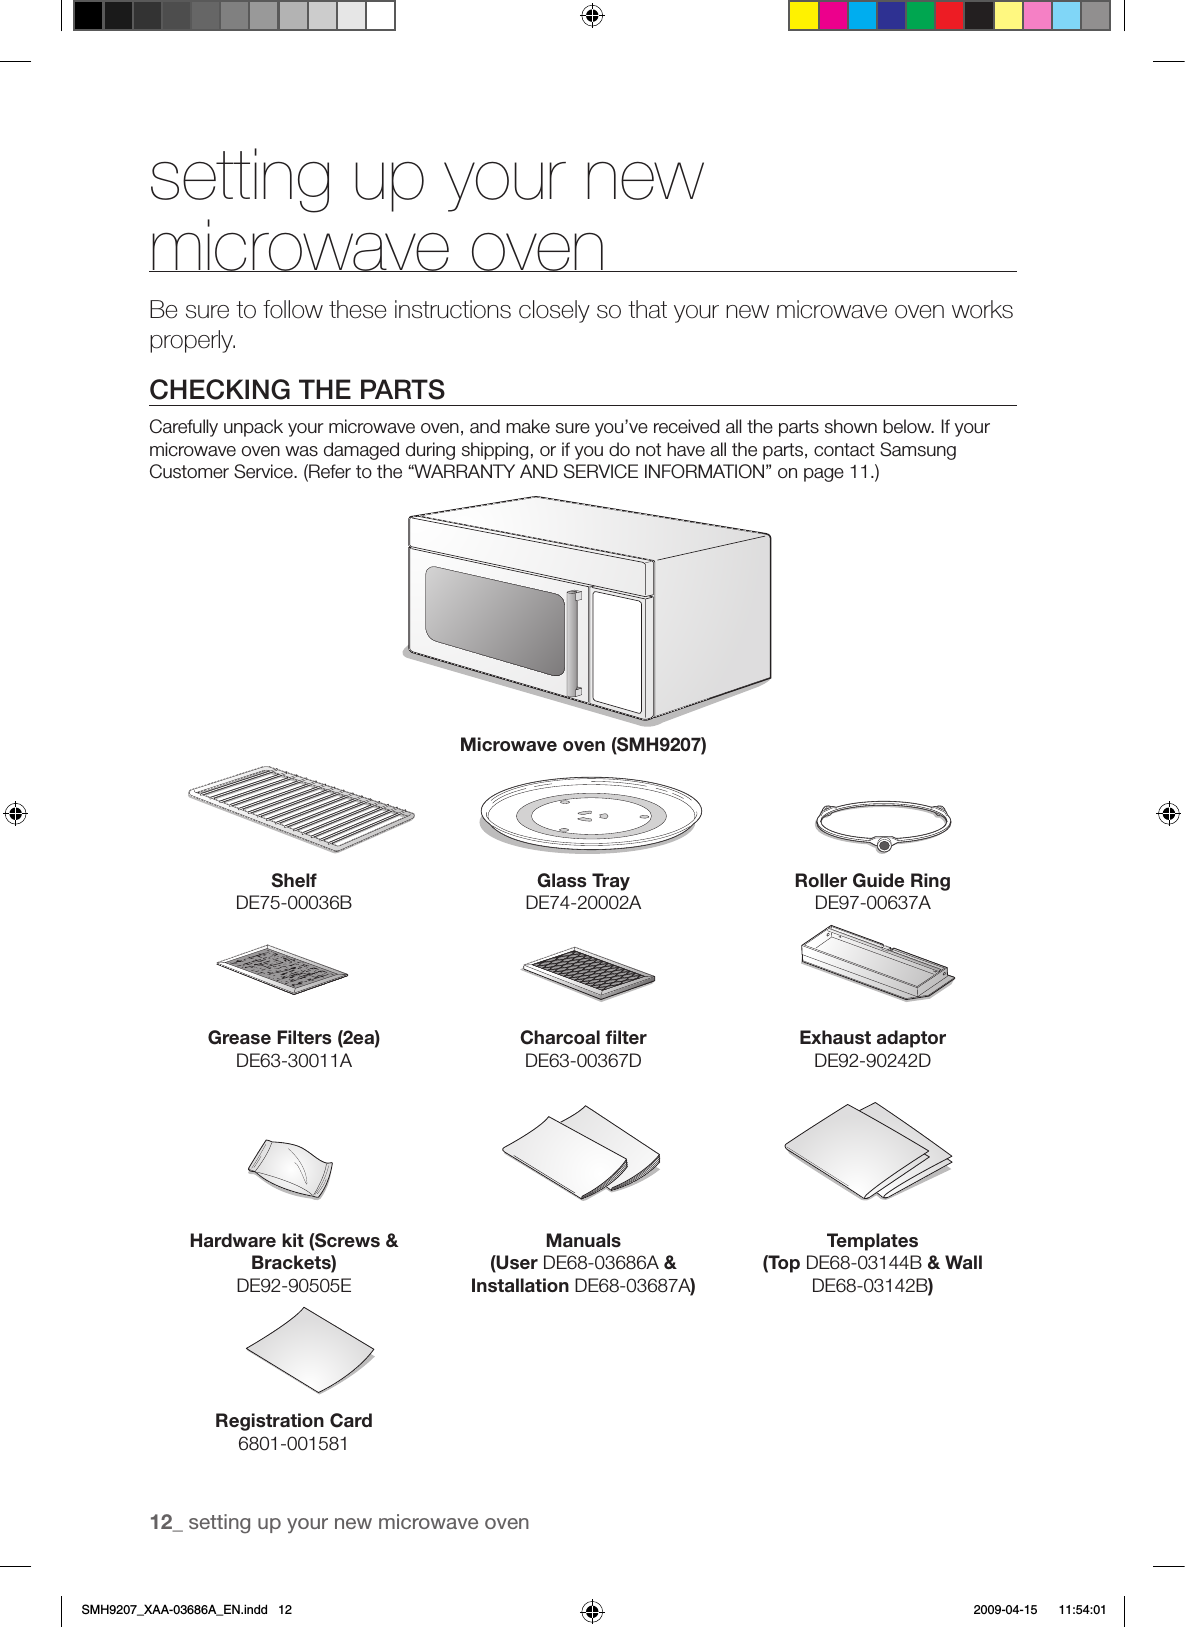 12_ setting up your new microwave oven setting up your new microwave ovenBe sure to follow these instructions closely so that your new microwave oven works properly.CHECKING THE PARTSCarefully unpack your microwave oven, and make sure you’ve received all the parts shown below. If your microwave oven was damaged during shipping, or if you do not have all the parts, contact Samsung Customer Service. (Refer to the “WARRANTY AND SERVICE INFORMATION” on page 11.)Microwave oven (SMH9207)ShelfDE75-00036BGlass TrayDE74-20002ARoller Guide RingDE97-00637AGrease Filters (2ea)DE63-30011ACharcoal ﬁlterDE63-00367DExhaust adaptorDE92-90242DHardware kit (Screws &amp; Brackets)DE92-90505EManuals(User DE68-03686A &amp; Installation DE68-03687A)Templates(Top DE68-03144B &amp; Wall DE68-03142B)Registration Card6801-001581SMH9207_XAA-03686A_EN.indd   12 2009-04-15    11:54:01